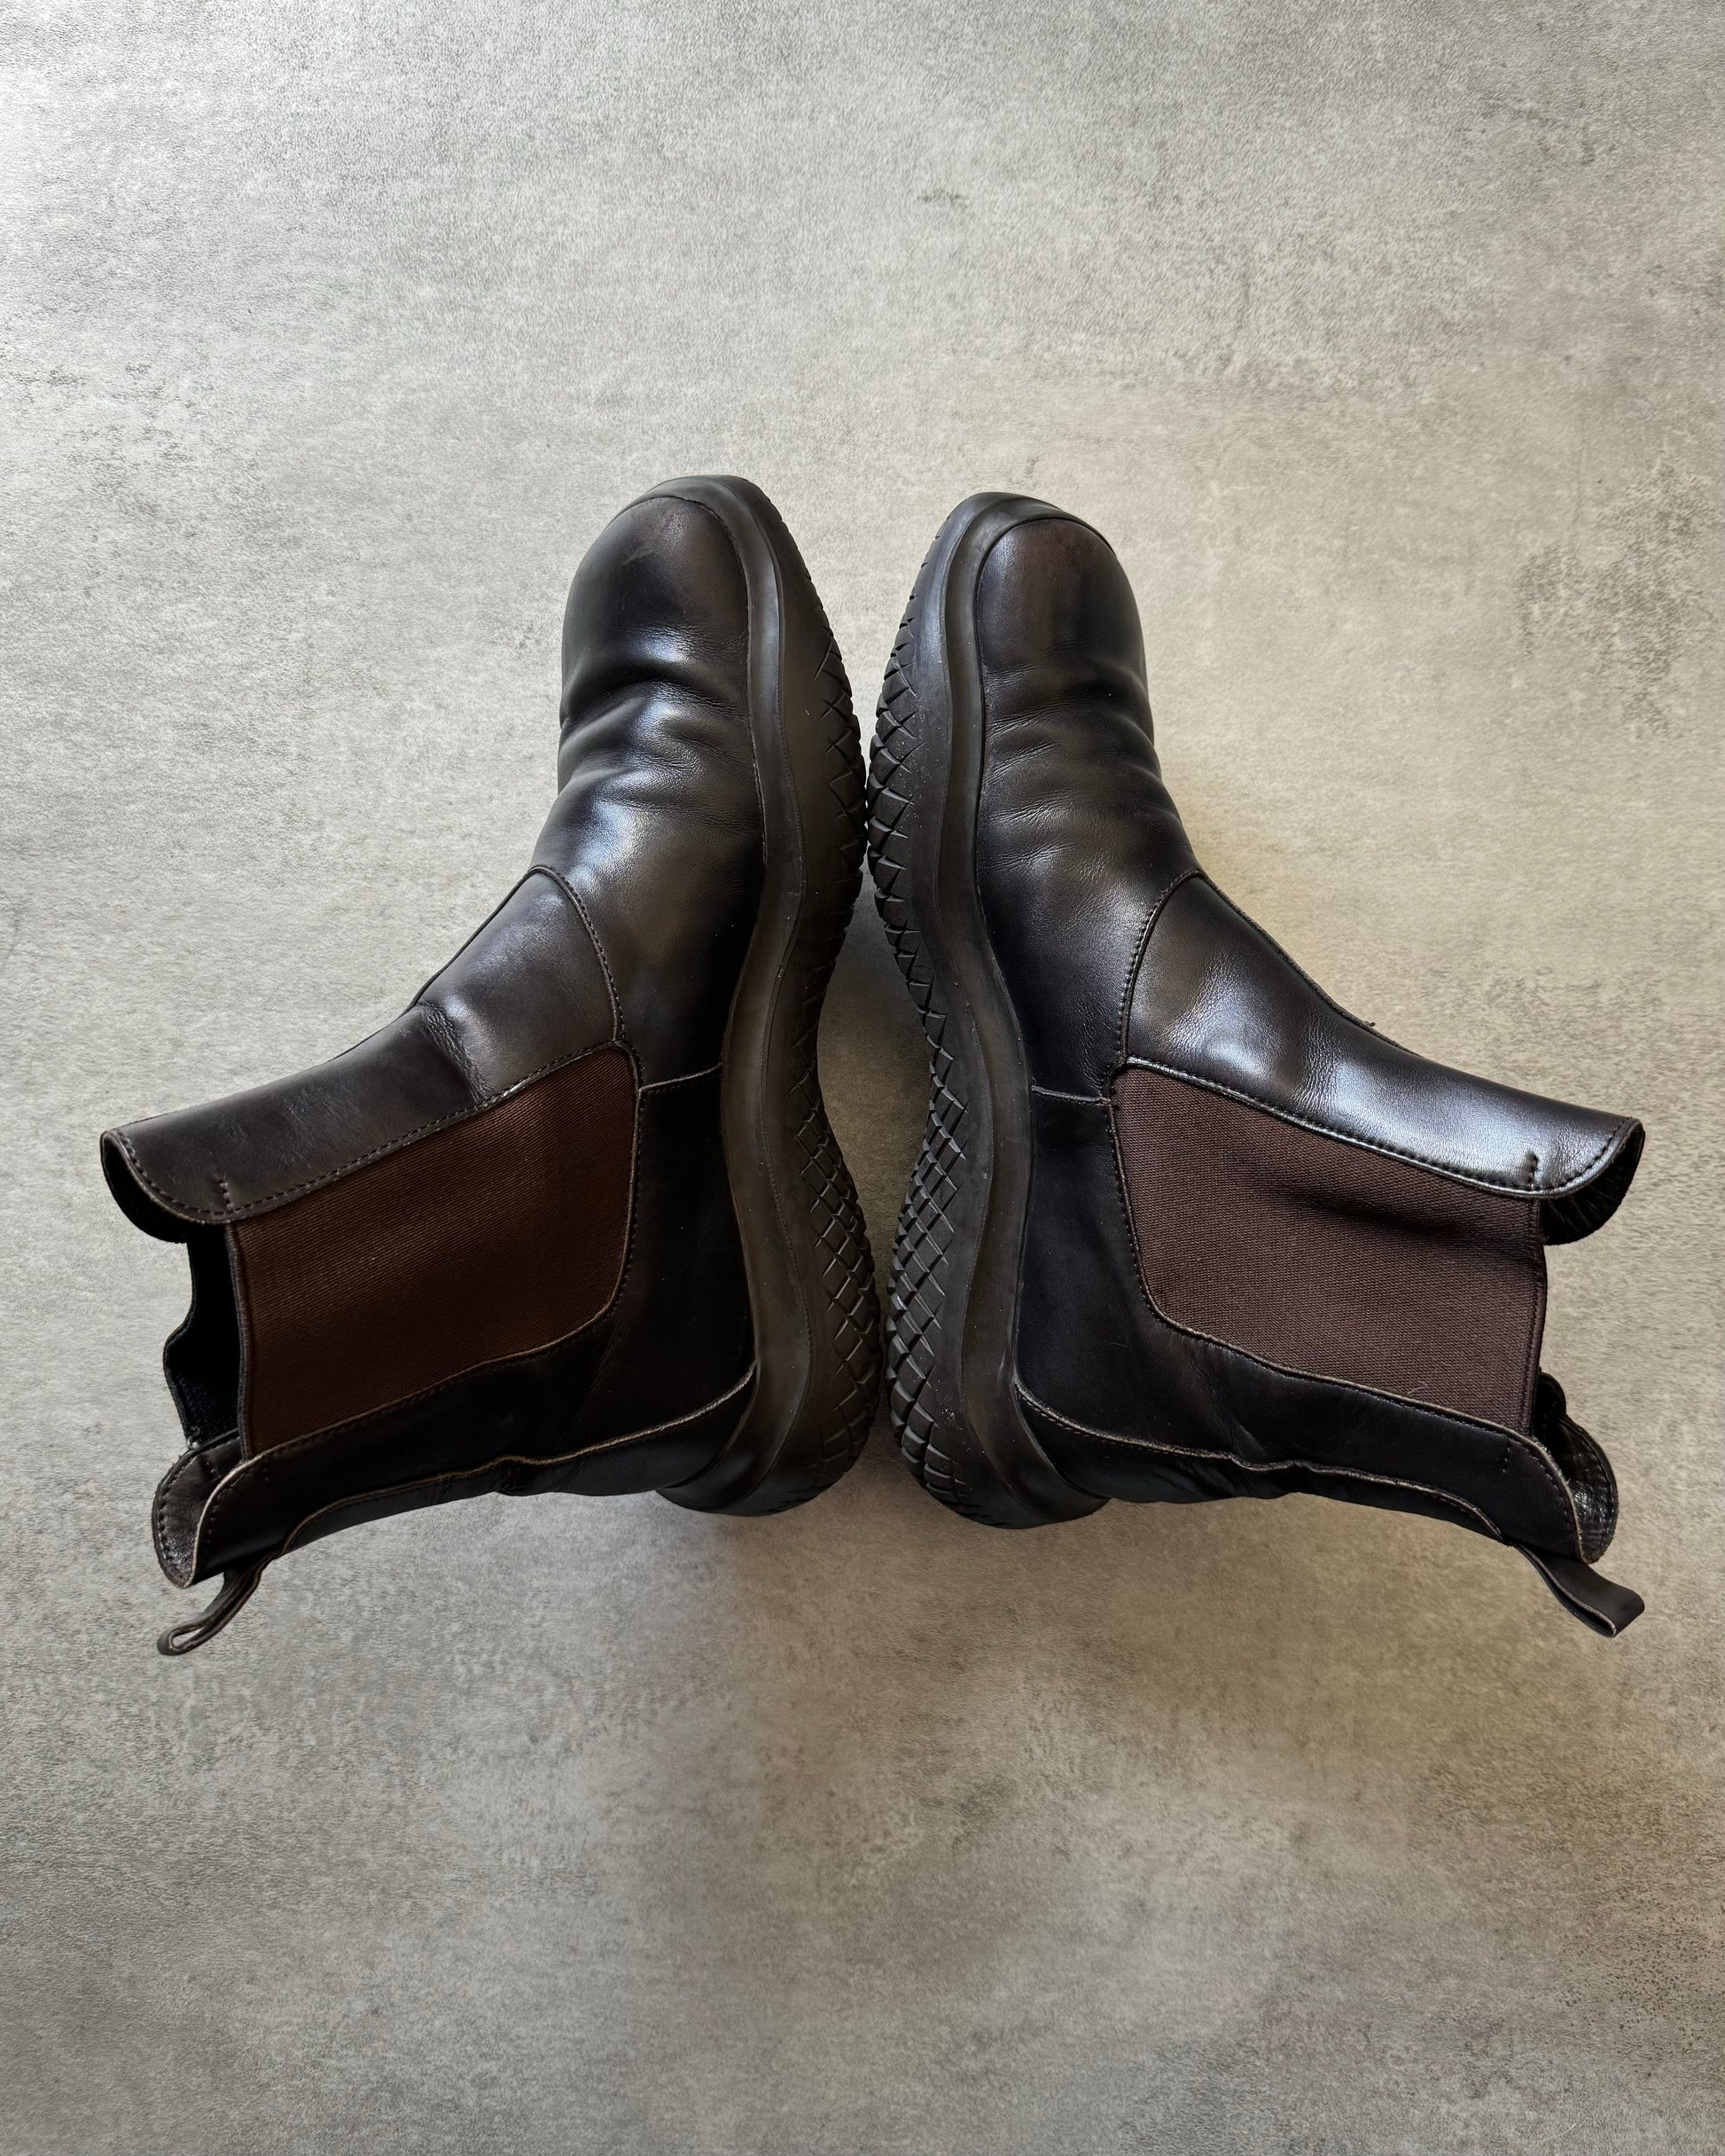 FW1999 Prada Brown Leather Boots (41) - 3